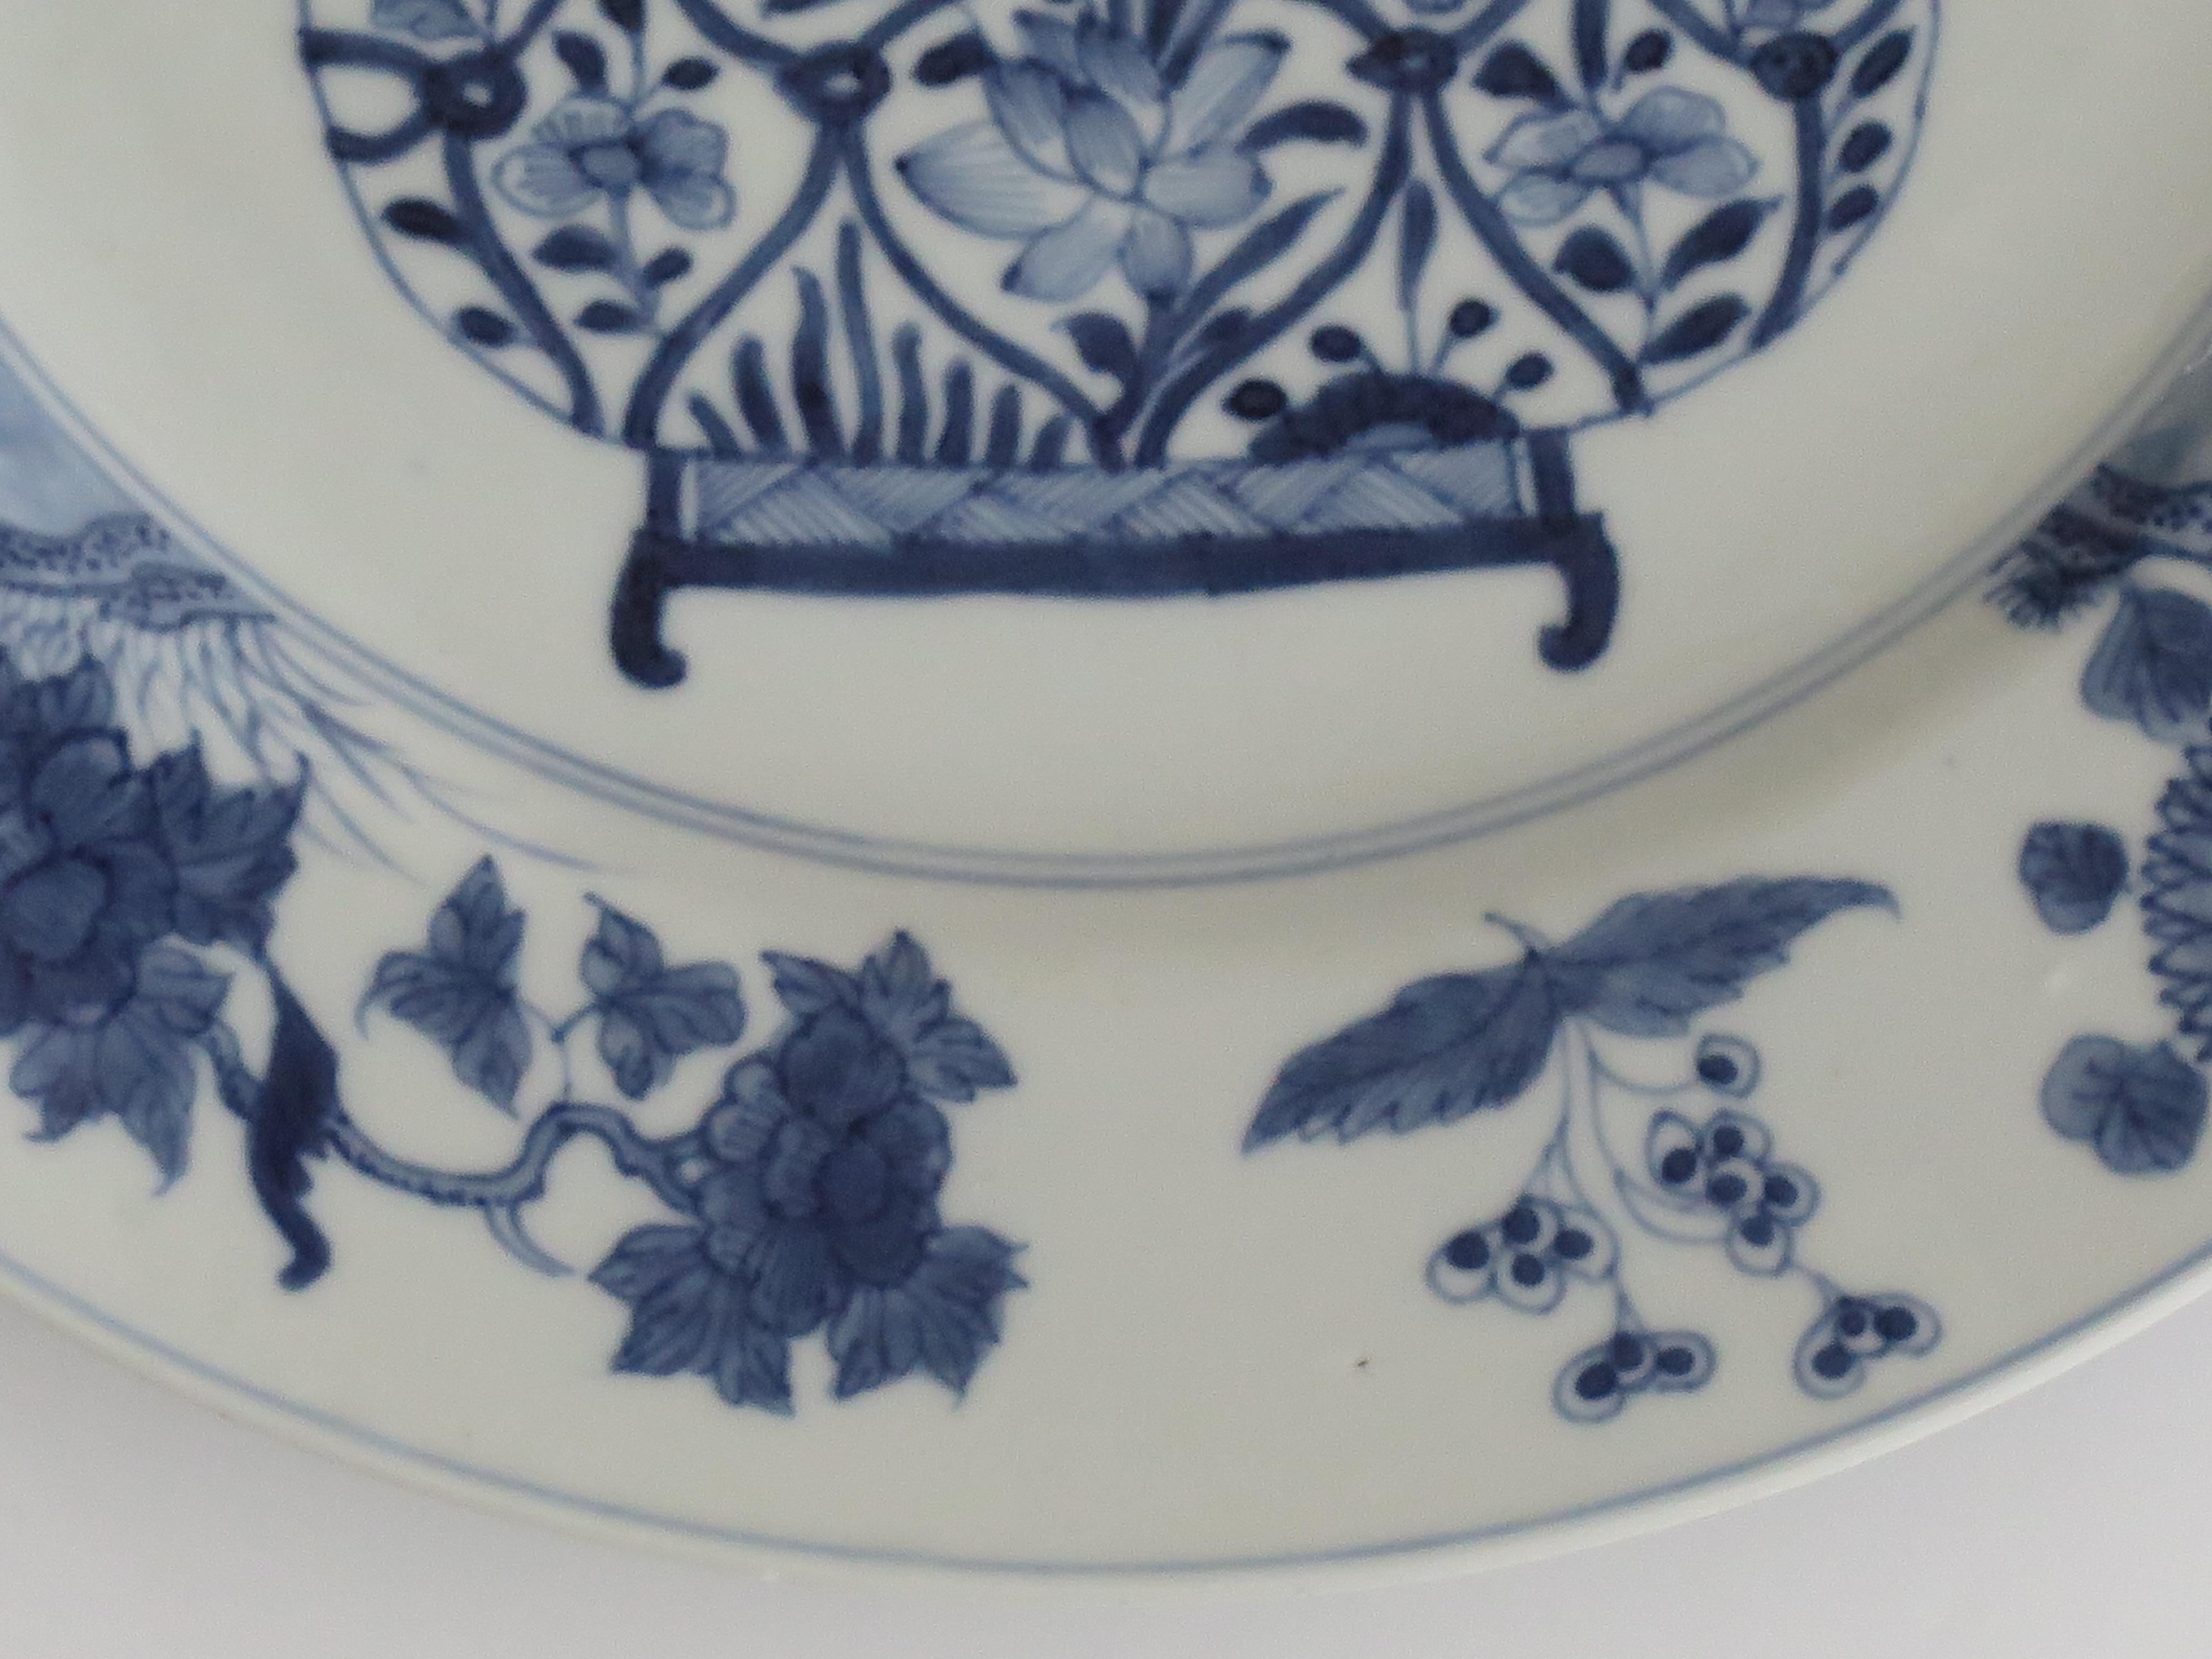 17th Century Kangxi Mark and period Chinese Large Plate Porcelain Blue & White, circa 1700